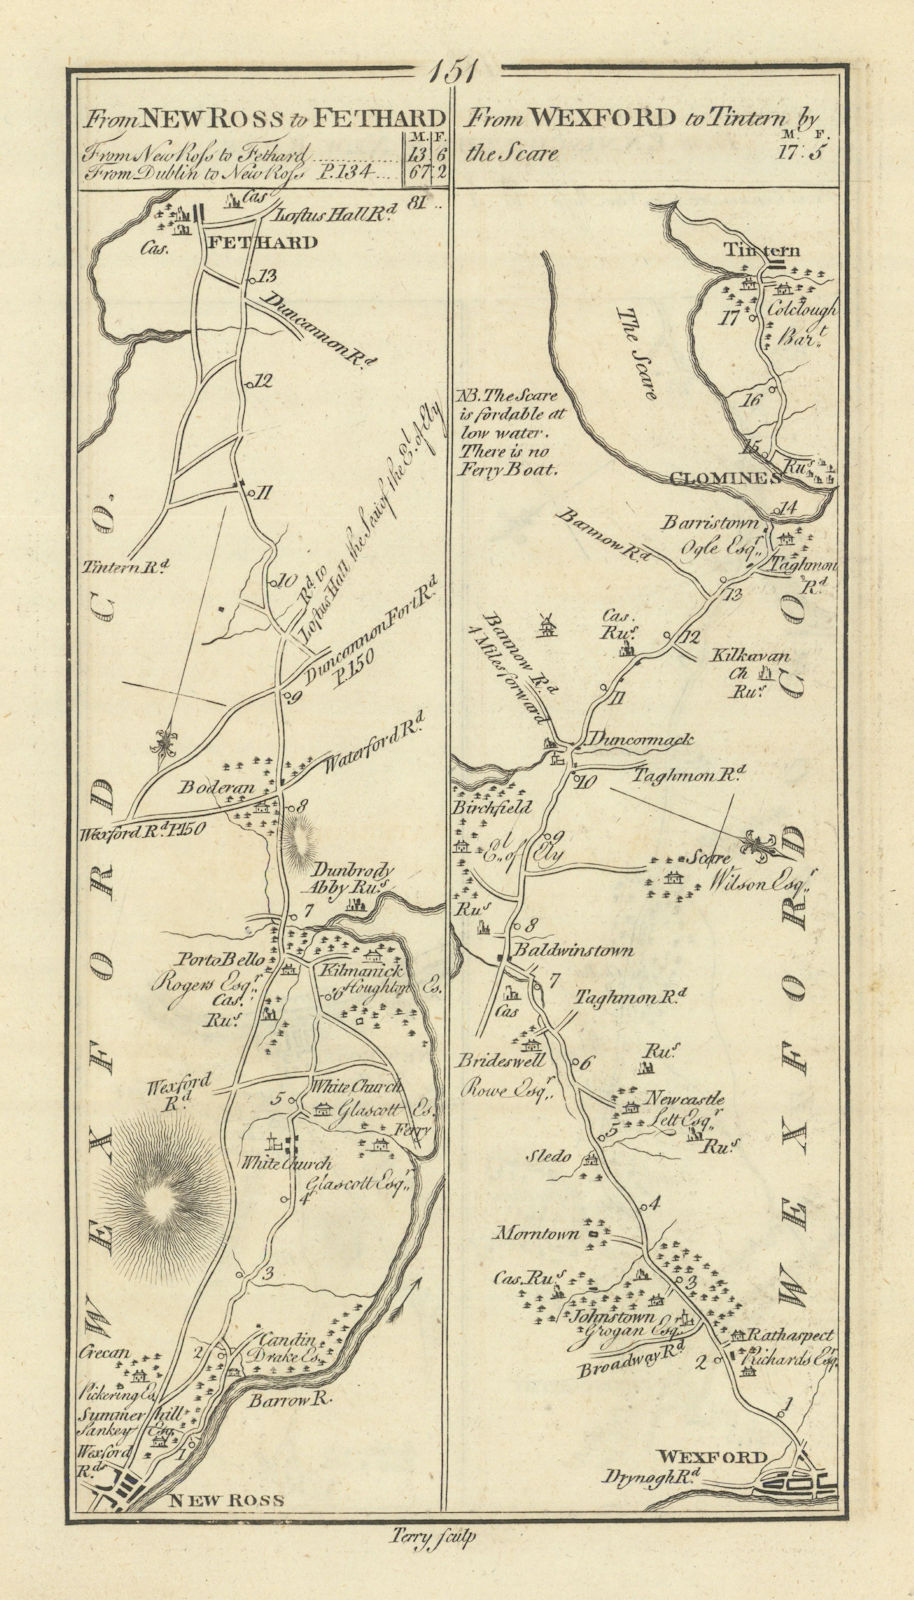 Associate Product #151 New Ross to Fethard / Wexford to Tintern. Clonmines TAYLOR/SKINNER 1778 map